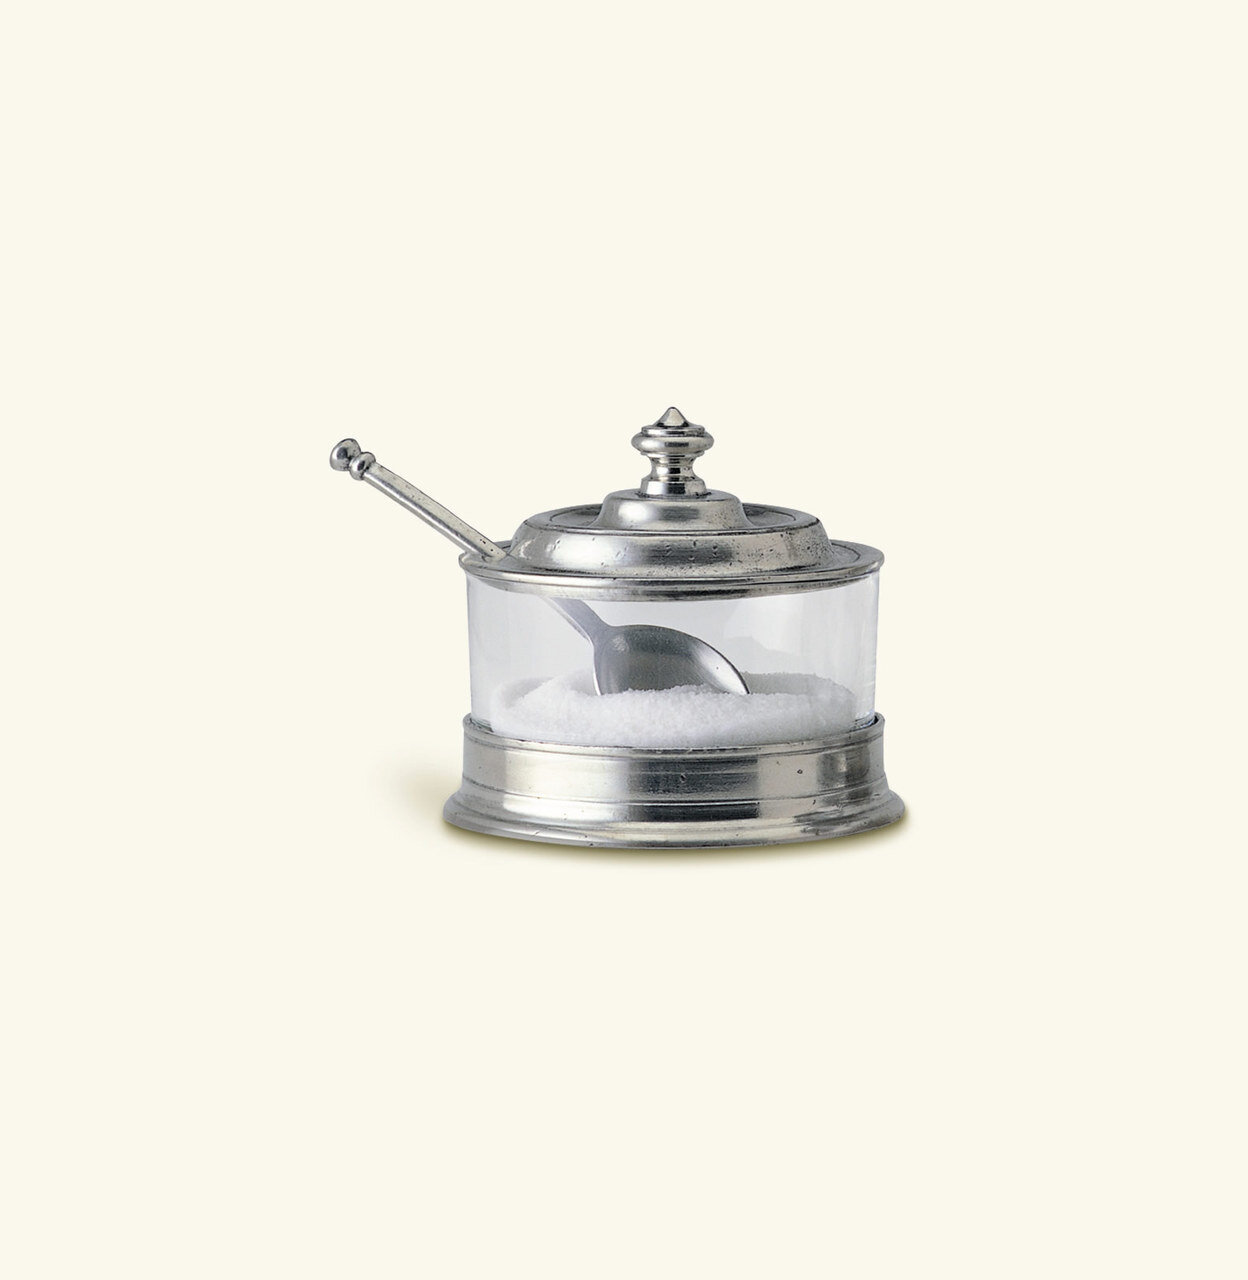 Match Pewter Jam Pot With Spoon 953